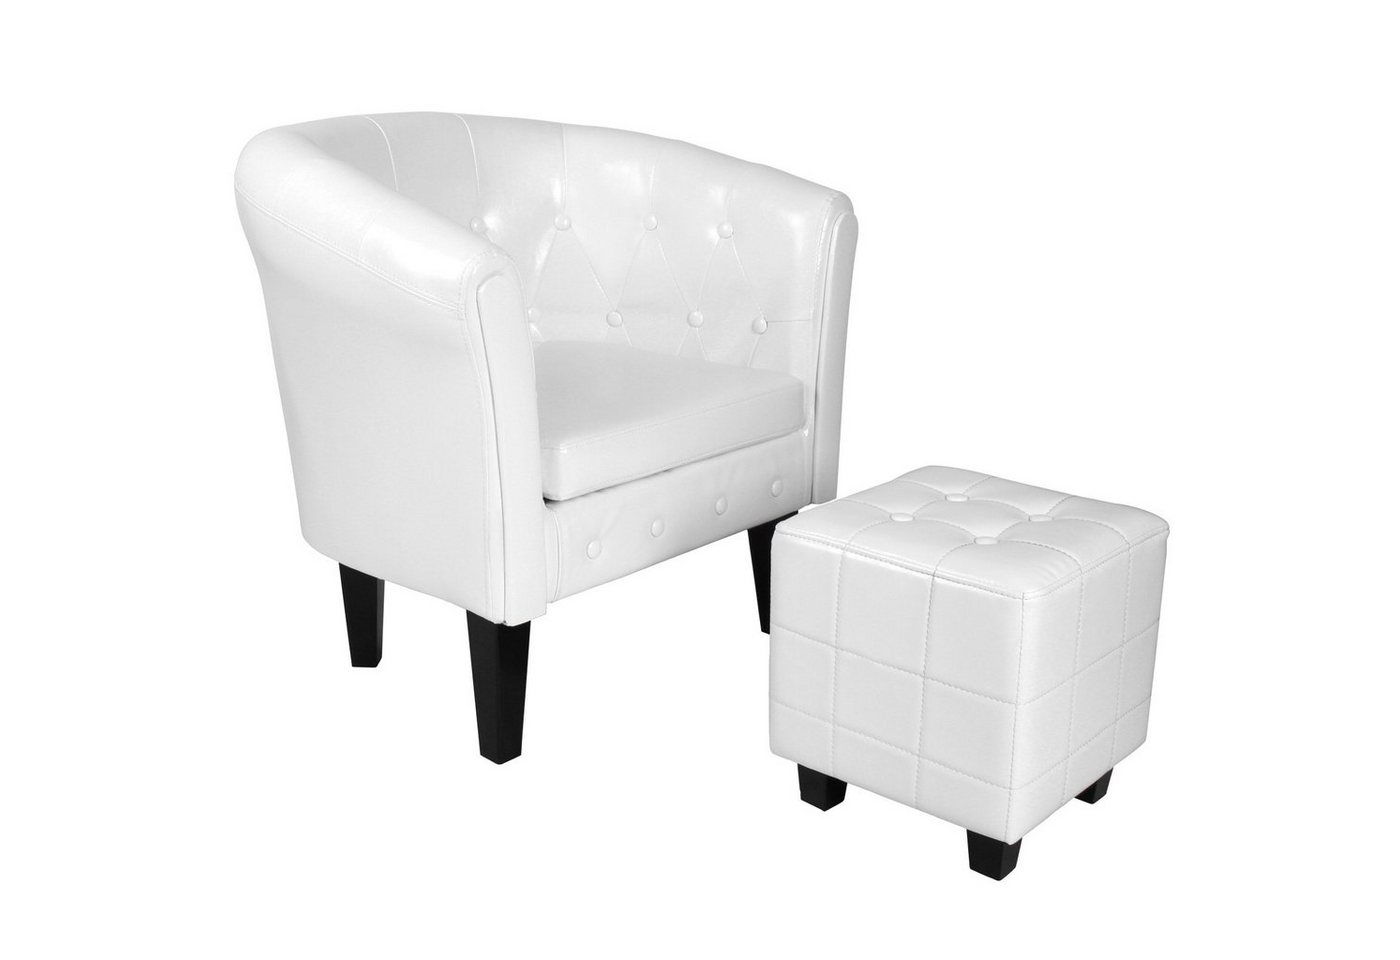 MIADOMODO Chesterfield-Sessel Chesterfield Sessel Hocker Loungesessel Clubsessel Cocktailsessel von MIADOMODO